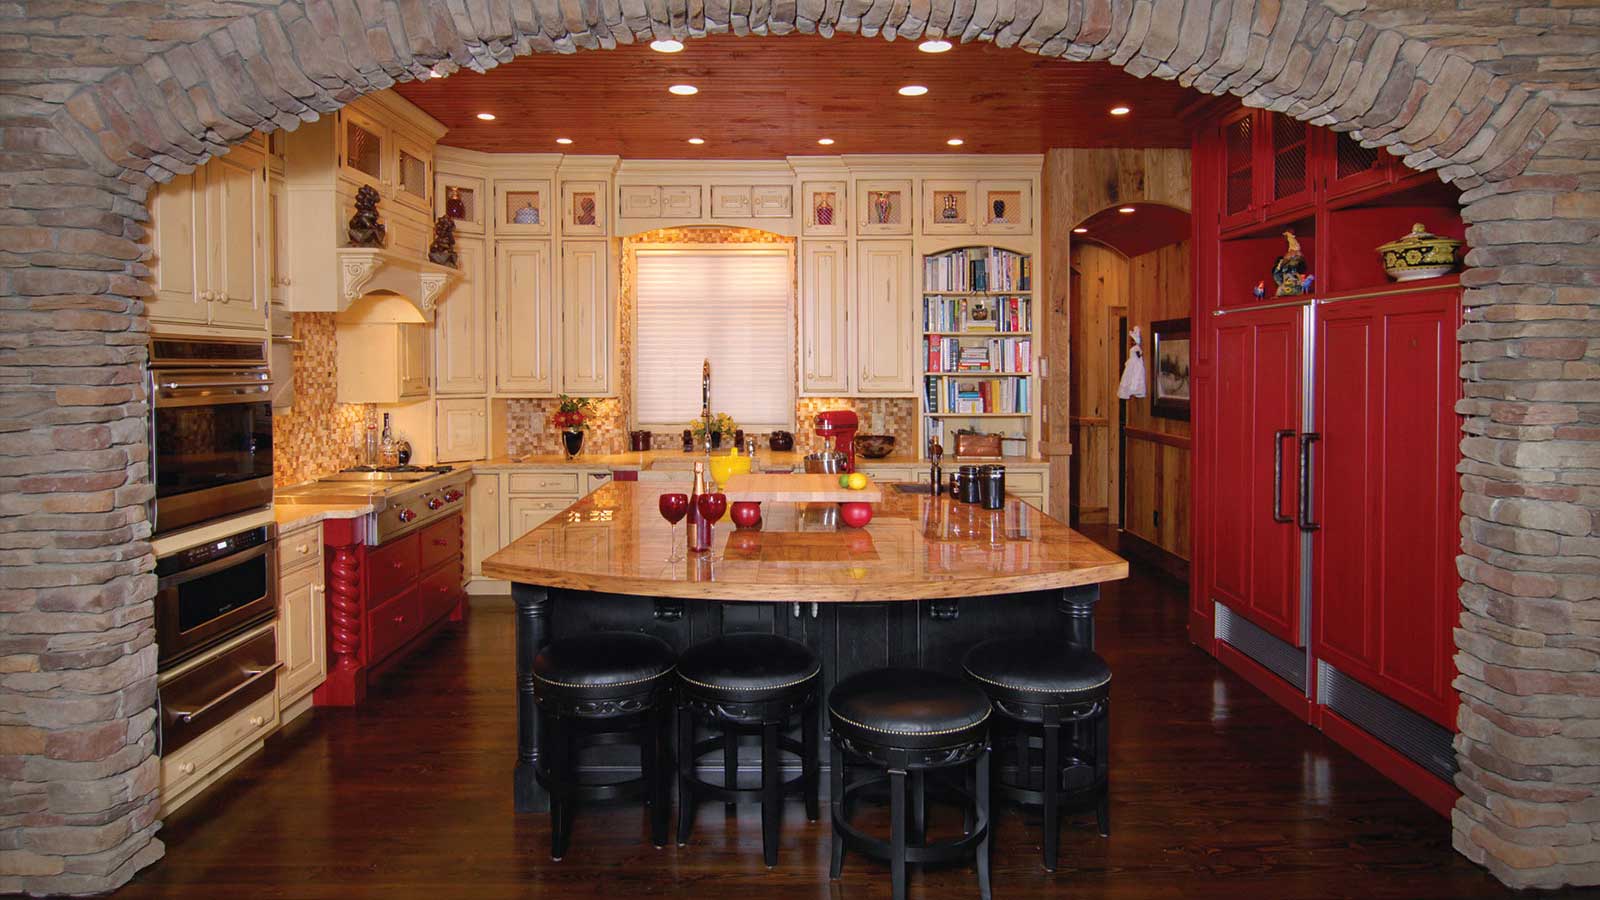 Kitchen cabinets designed by Precision Cabinets, Inc.